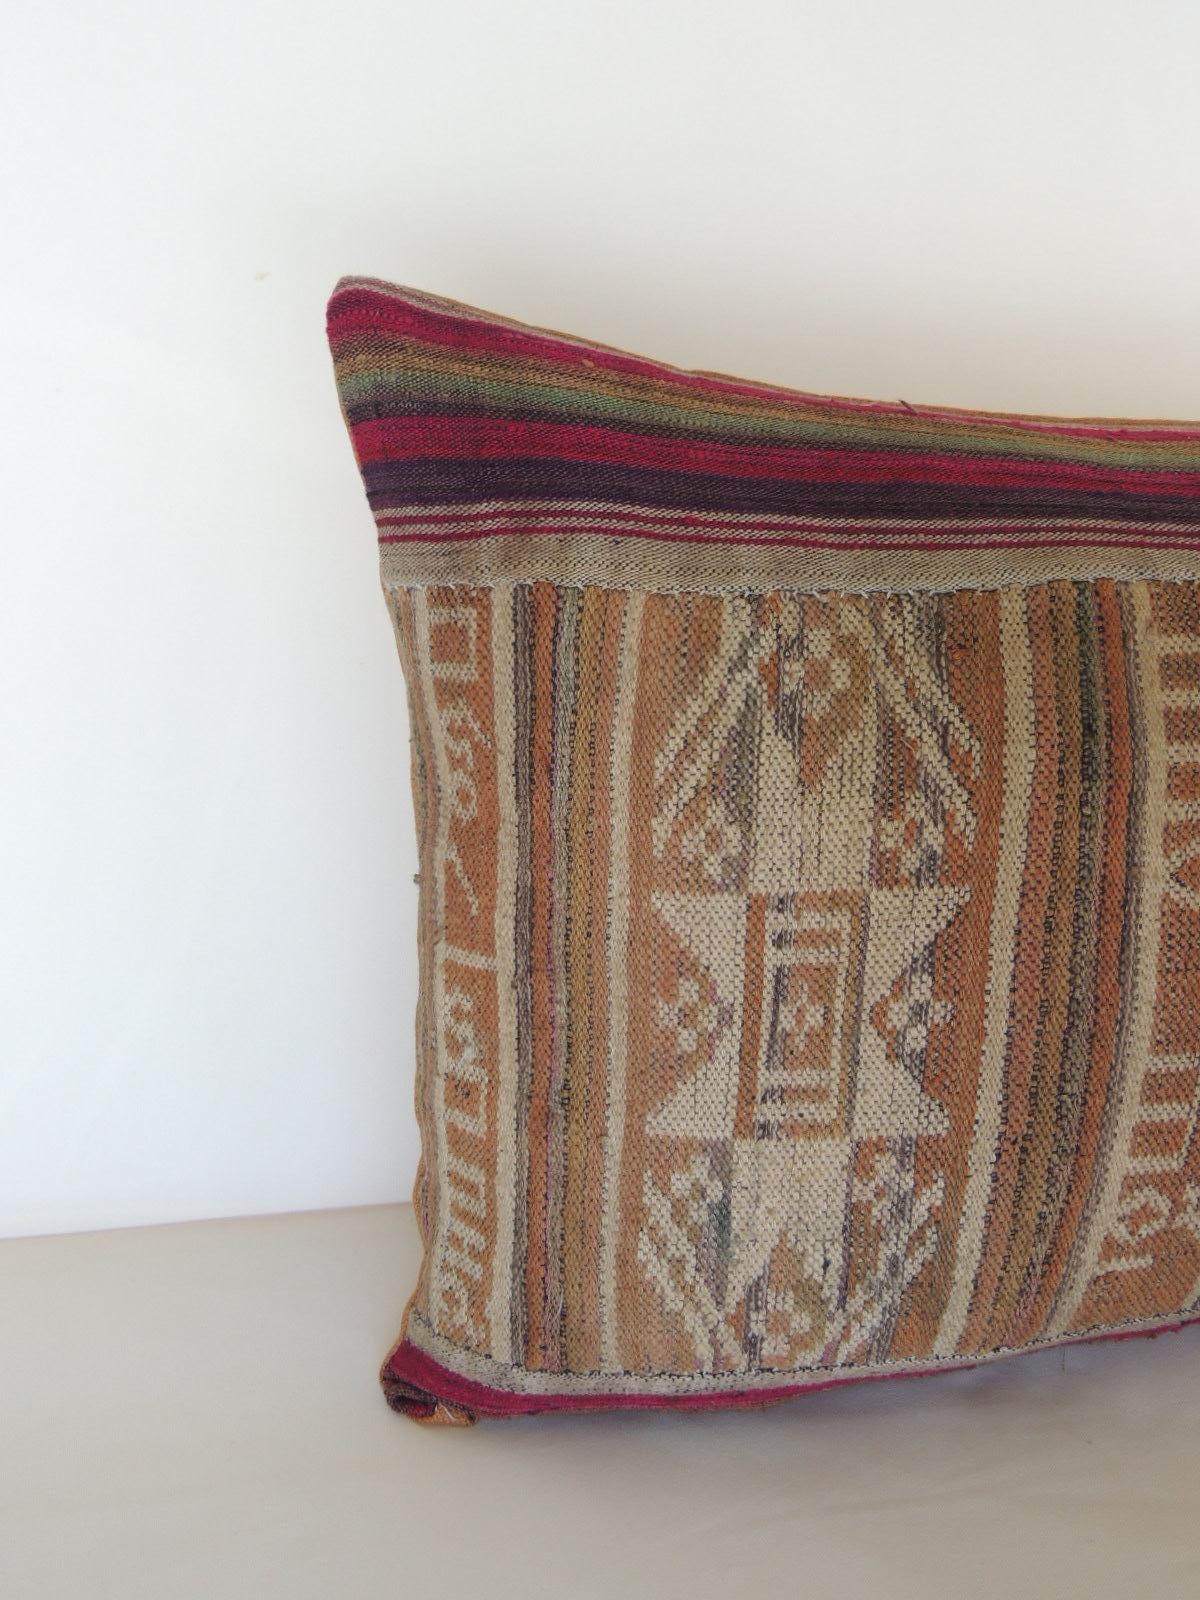 Laotian Antique Asian Red and Green Woven Stripes Decorative Lumbar Pillow